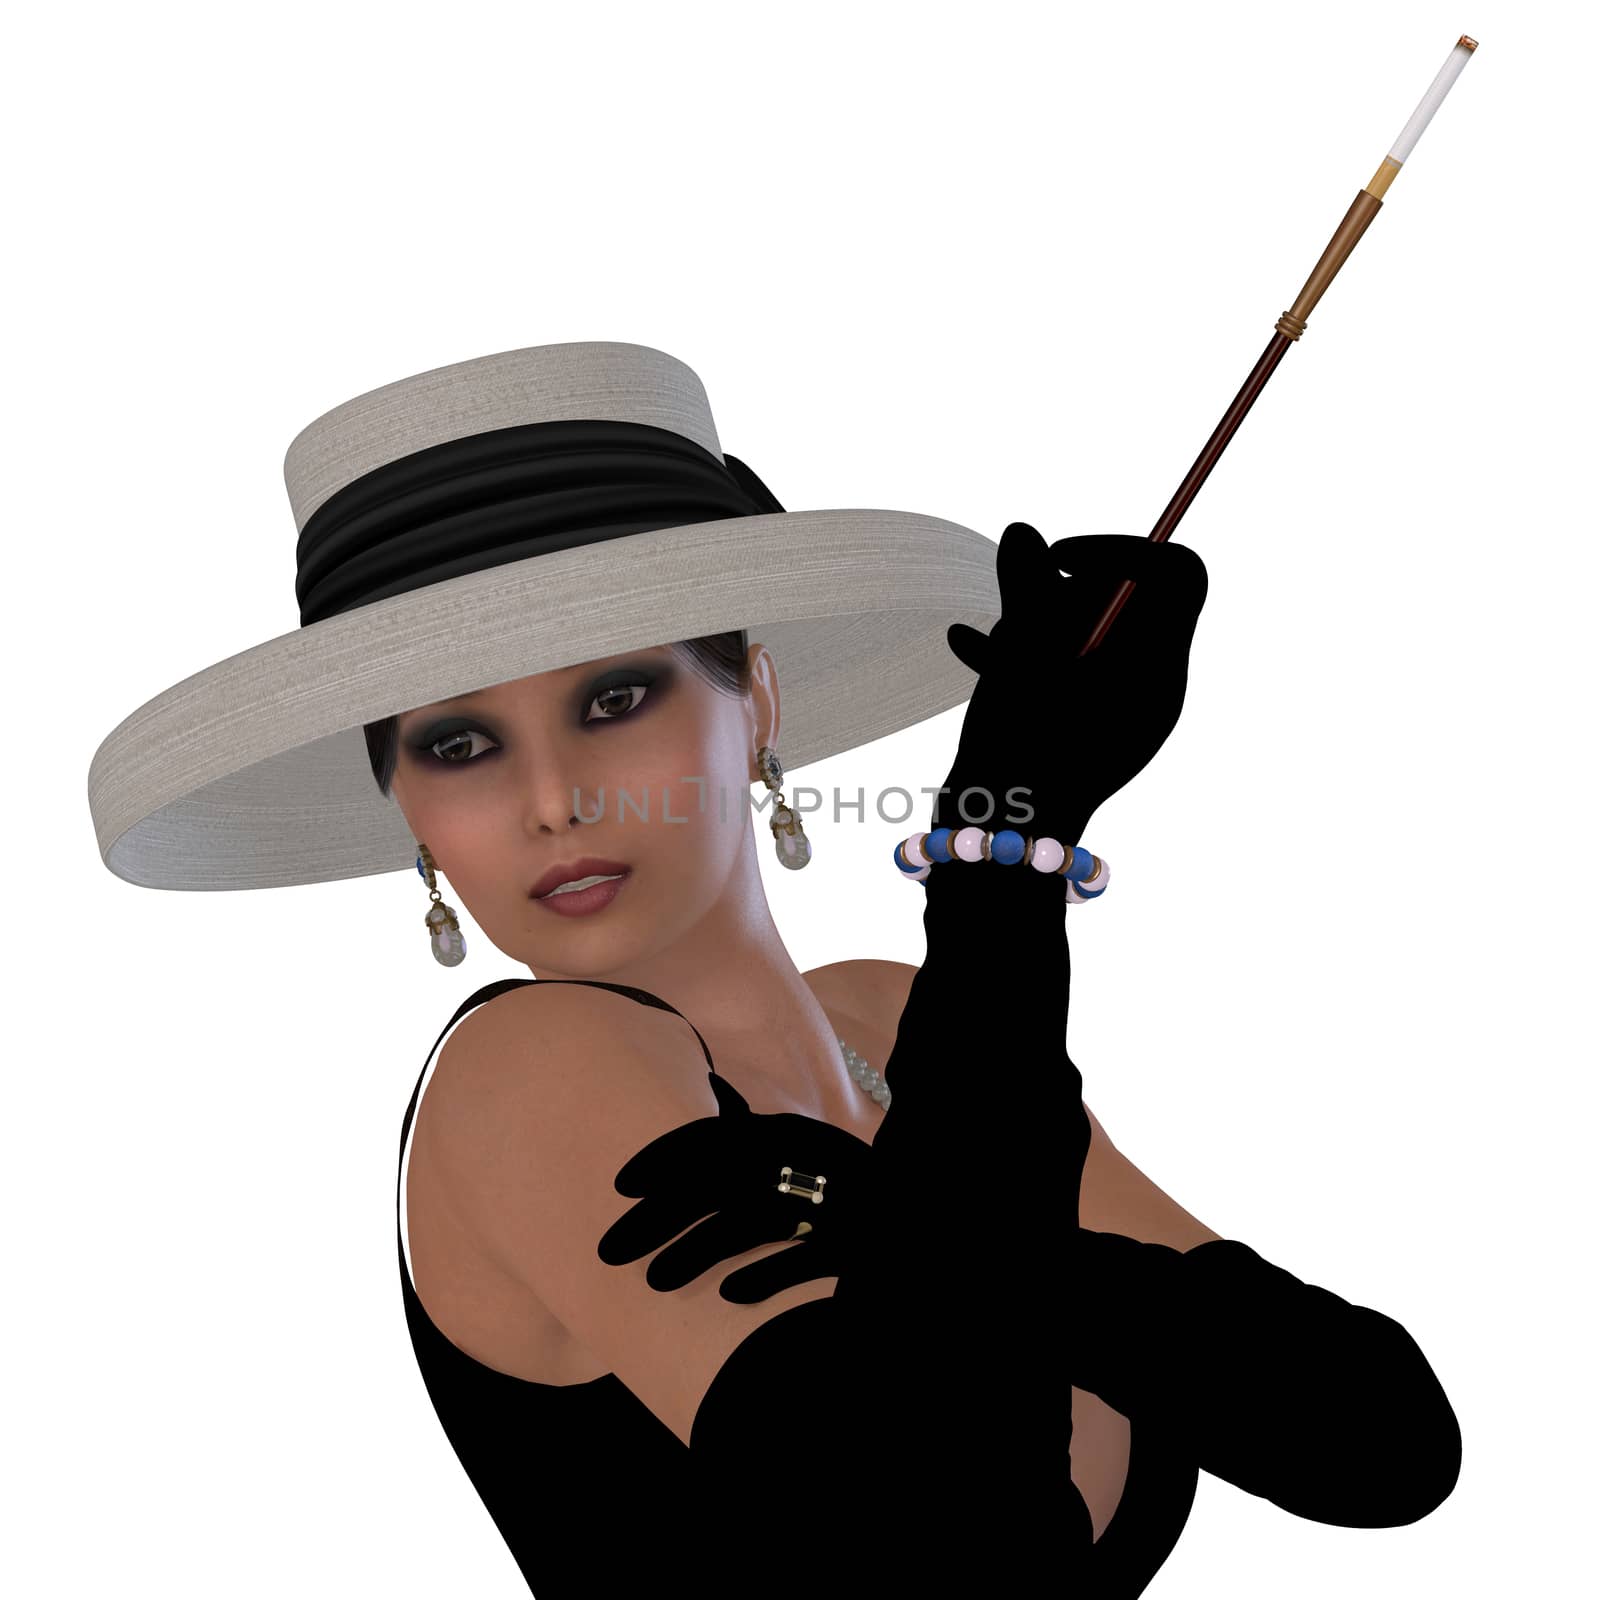 A beautiful woman in a black dress, hat and gloves in the style of old Hollywood glamour.